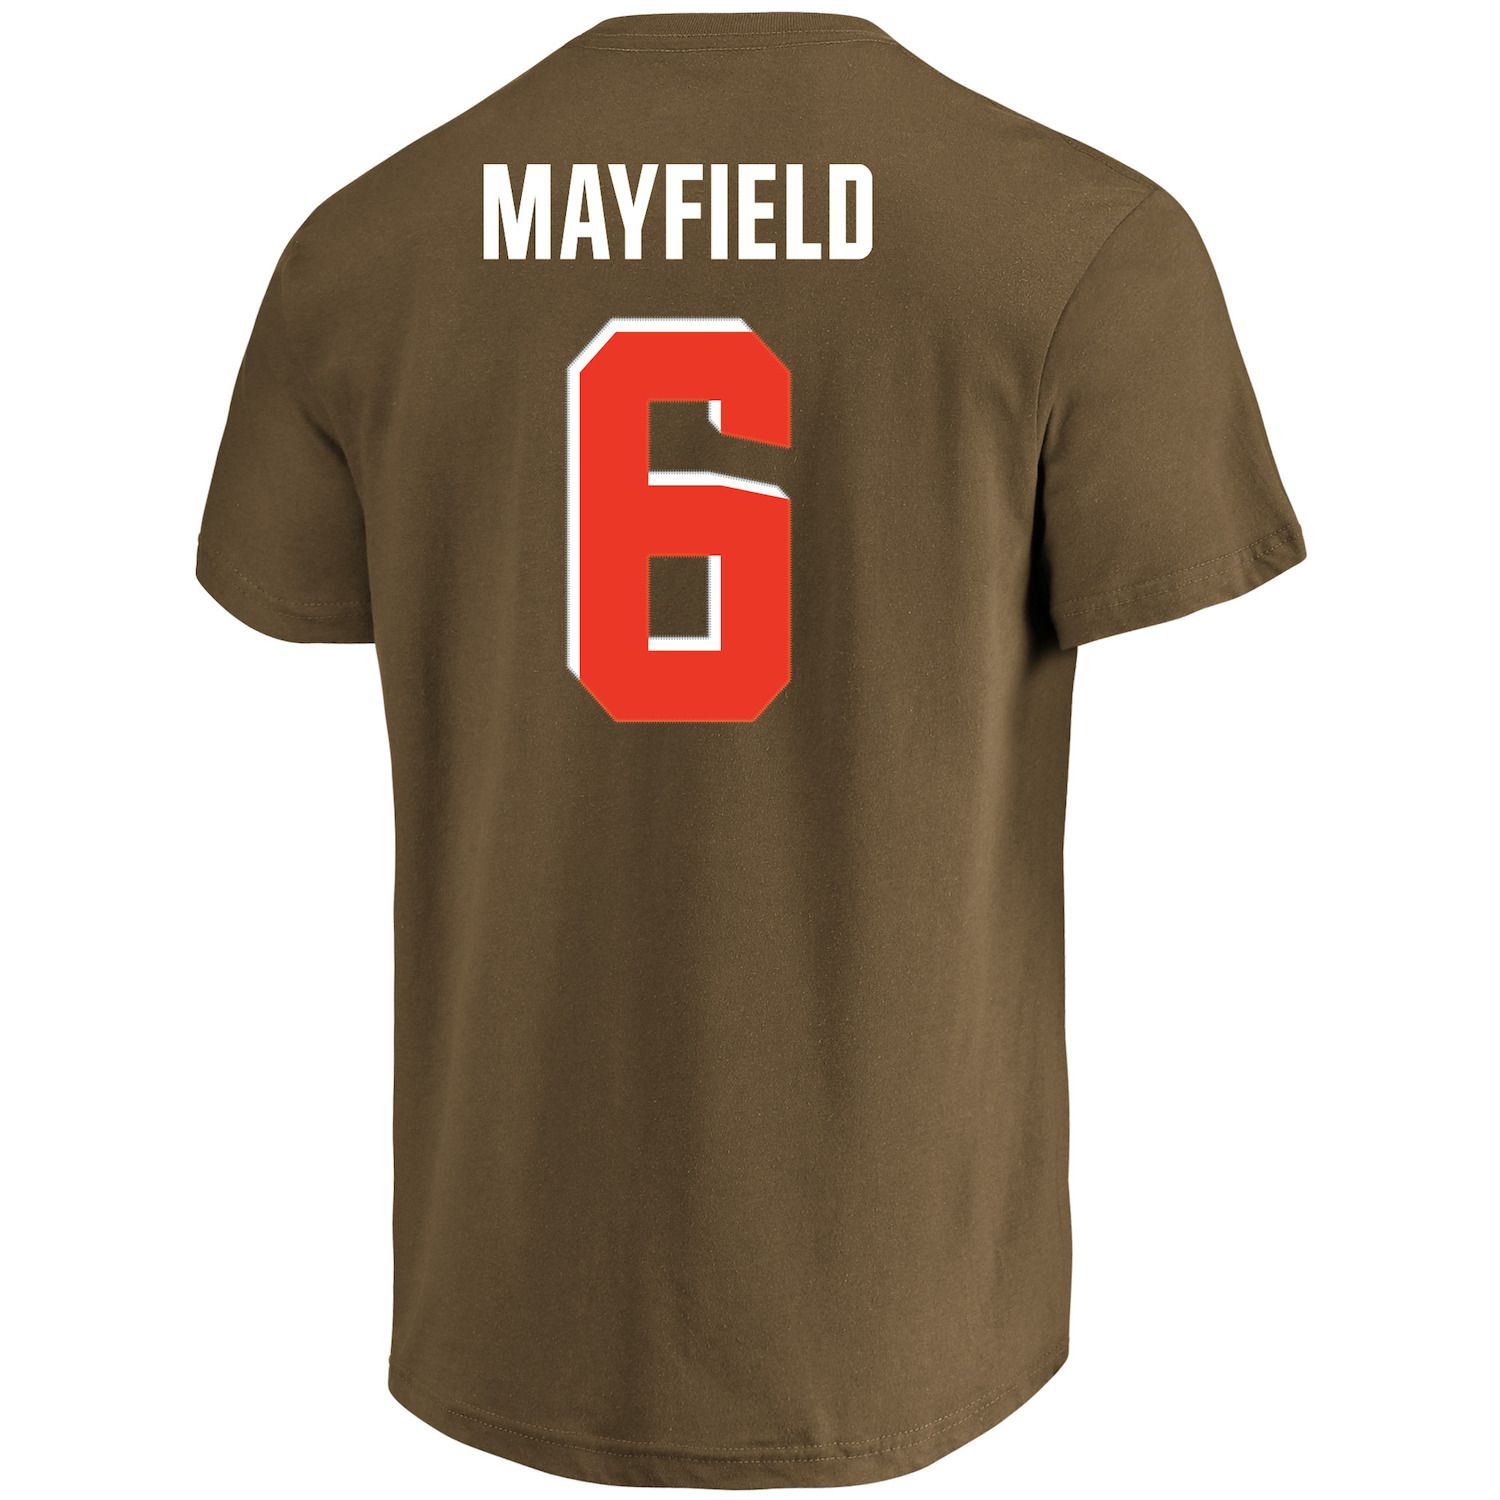 big and tall cleveland browns jersey